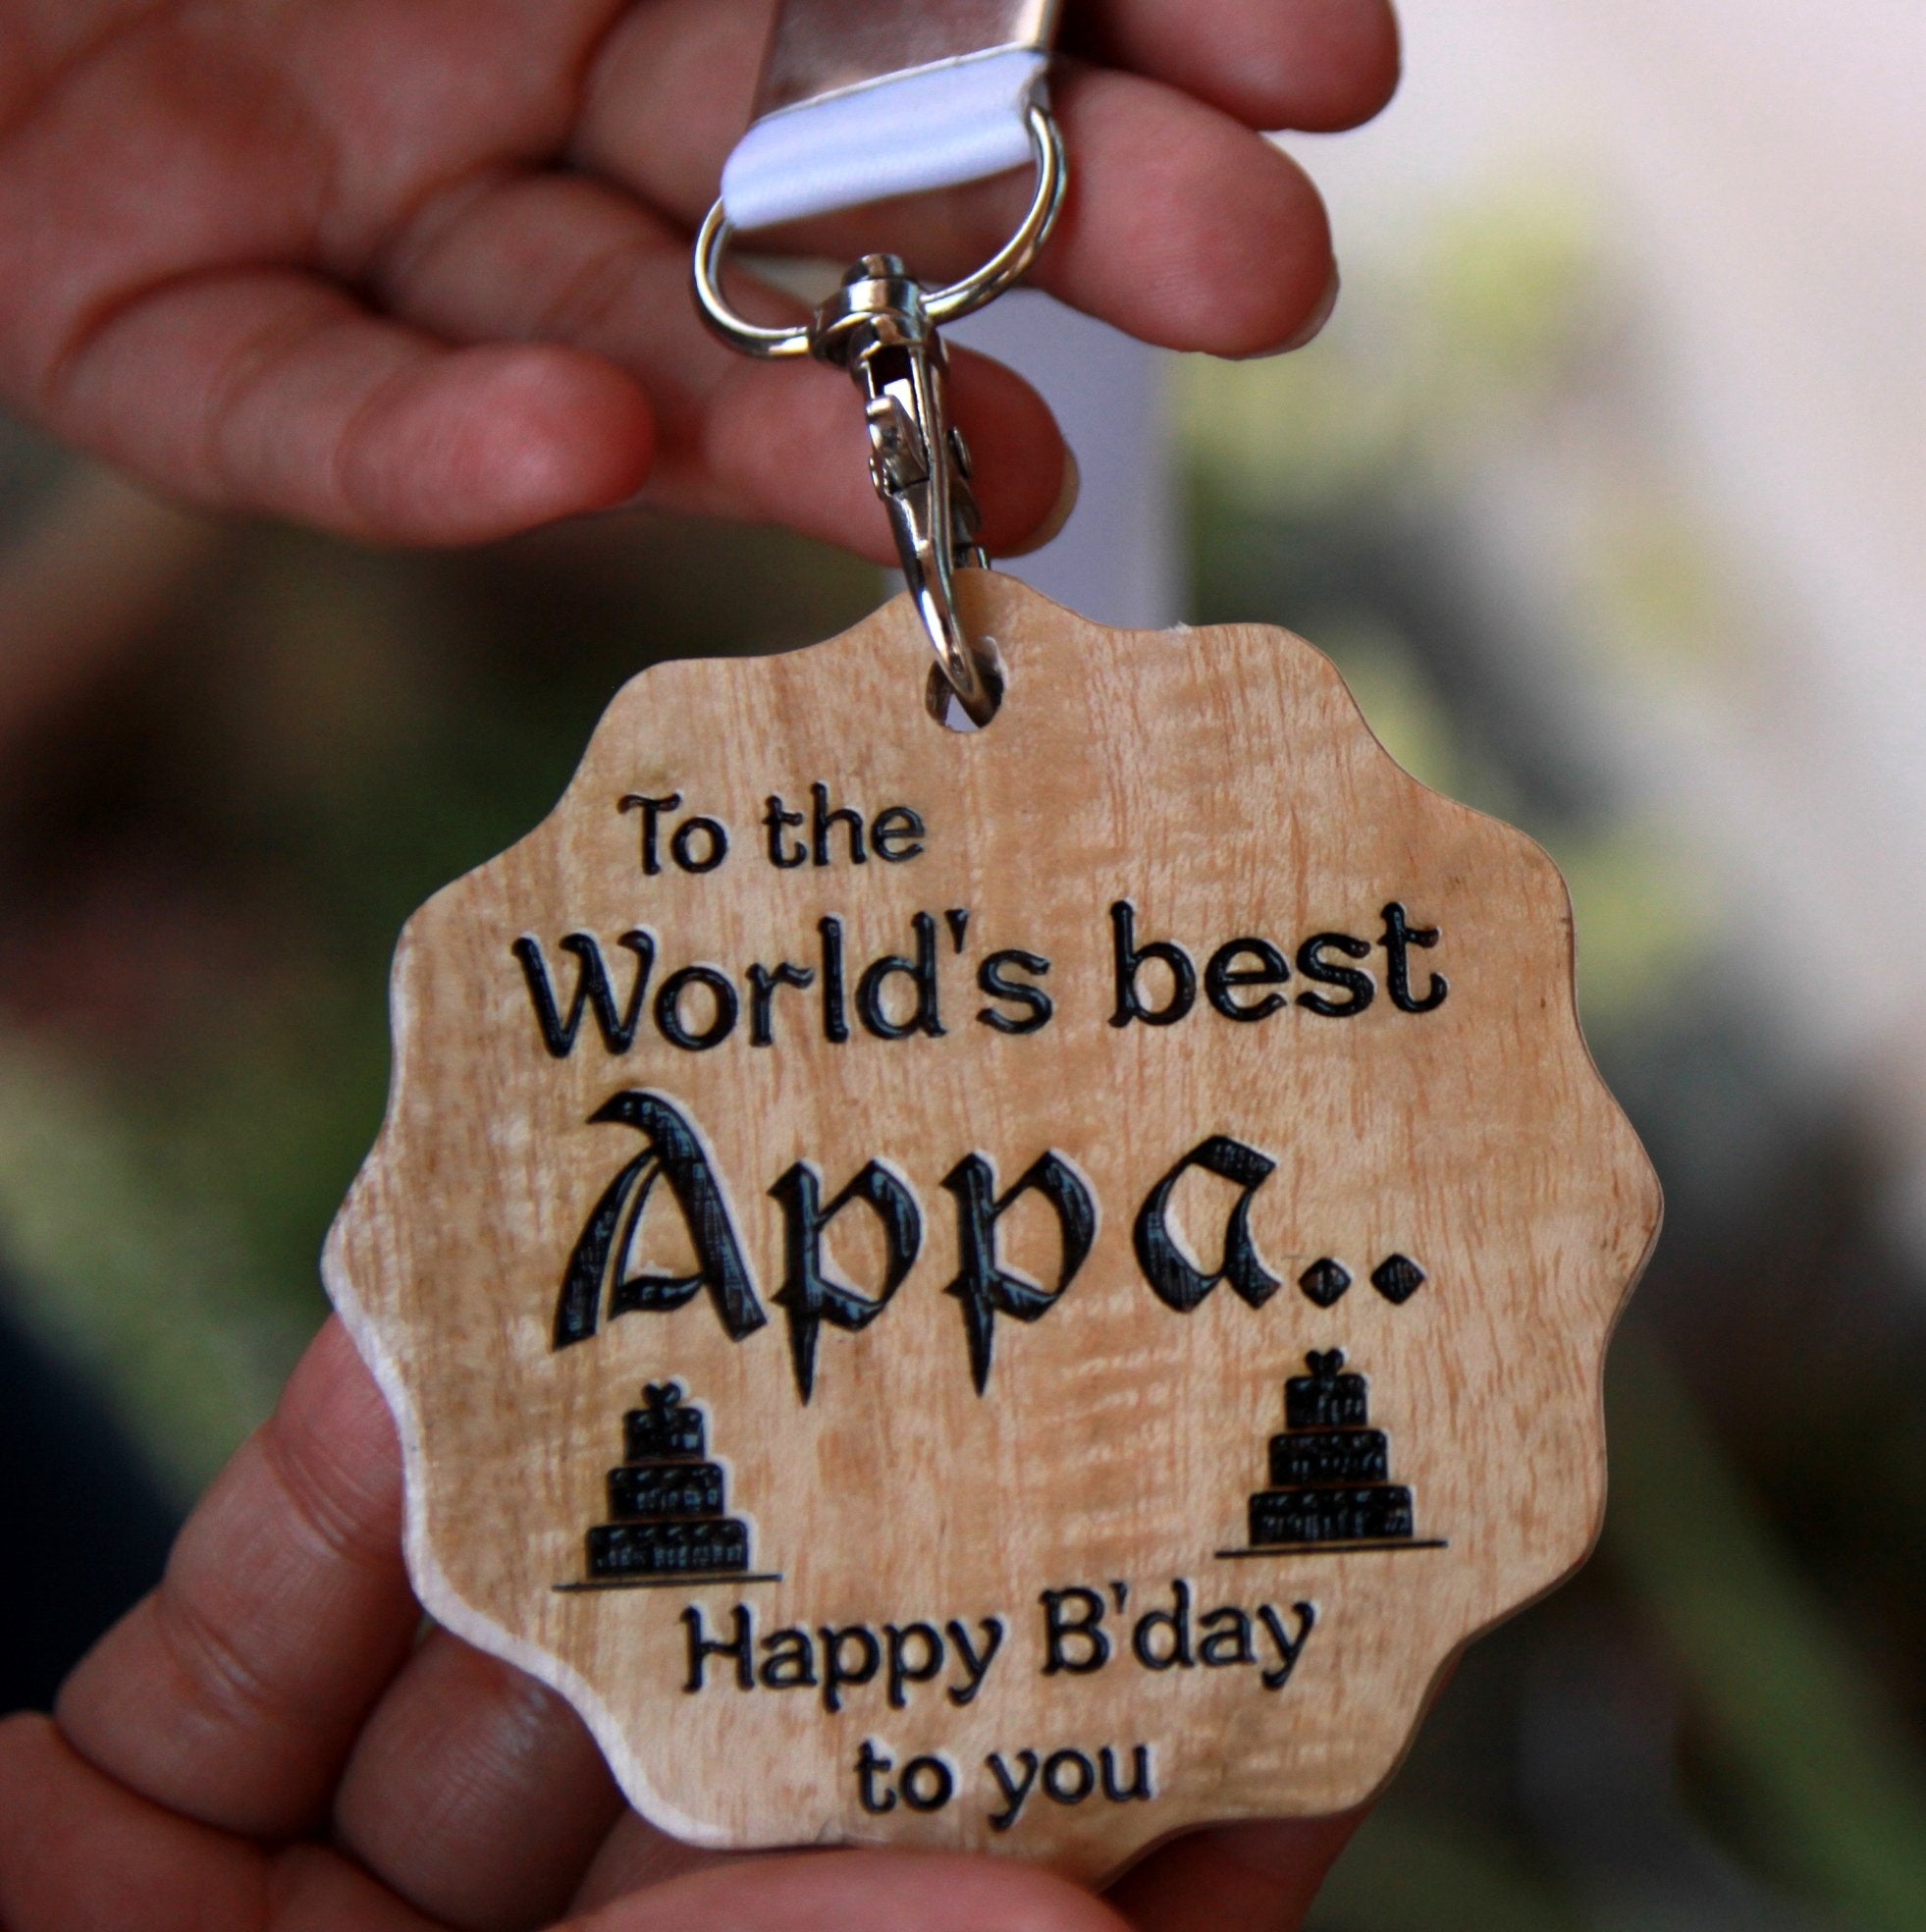 A Wooden Happy Birthday Medal Makes The Best Gifts For Dad. Looking for birthday gifts for dad? This Personalised Gift Is The Best Gift For Father